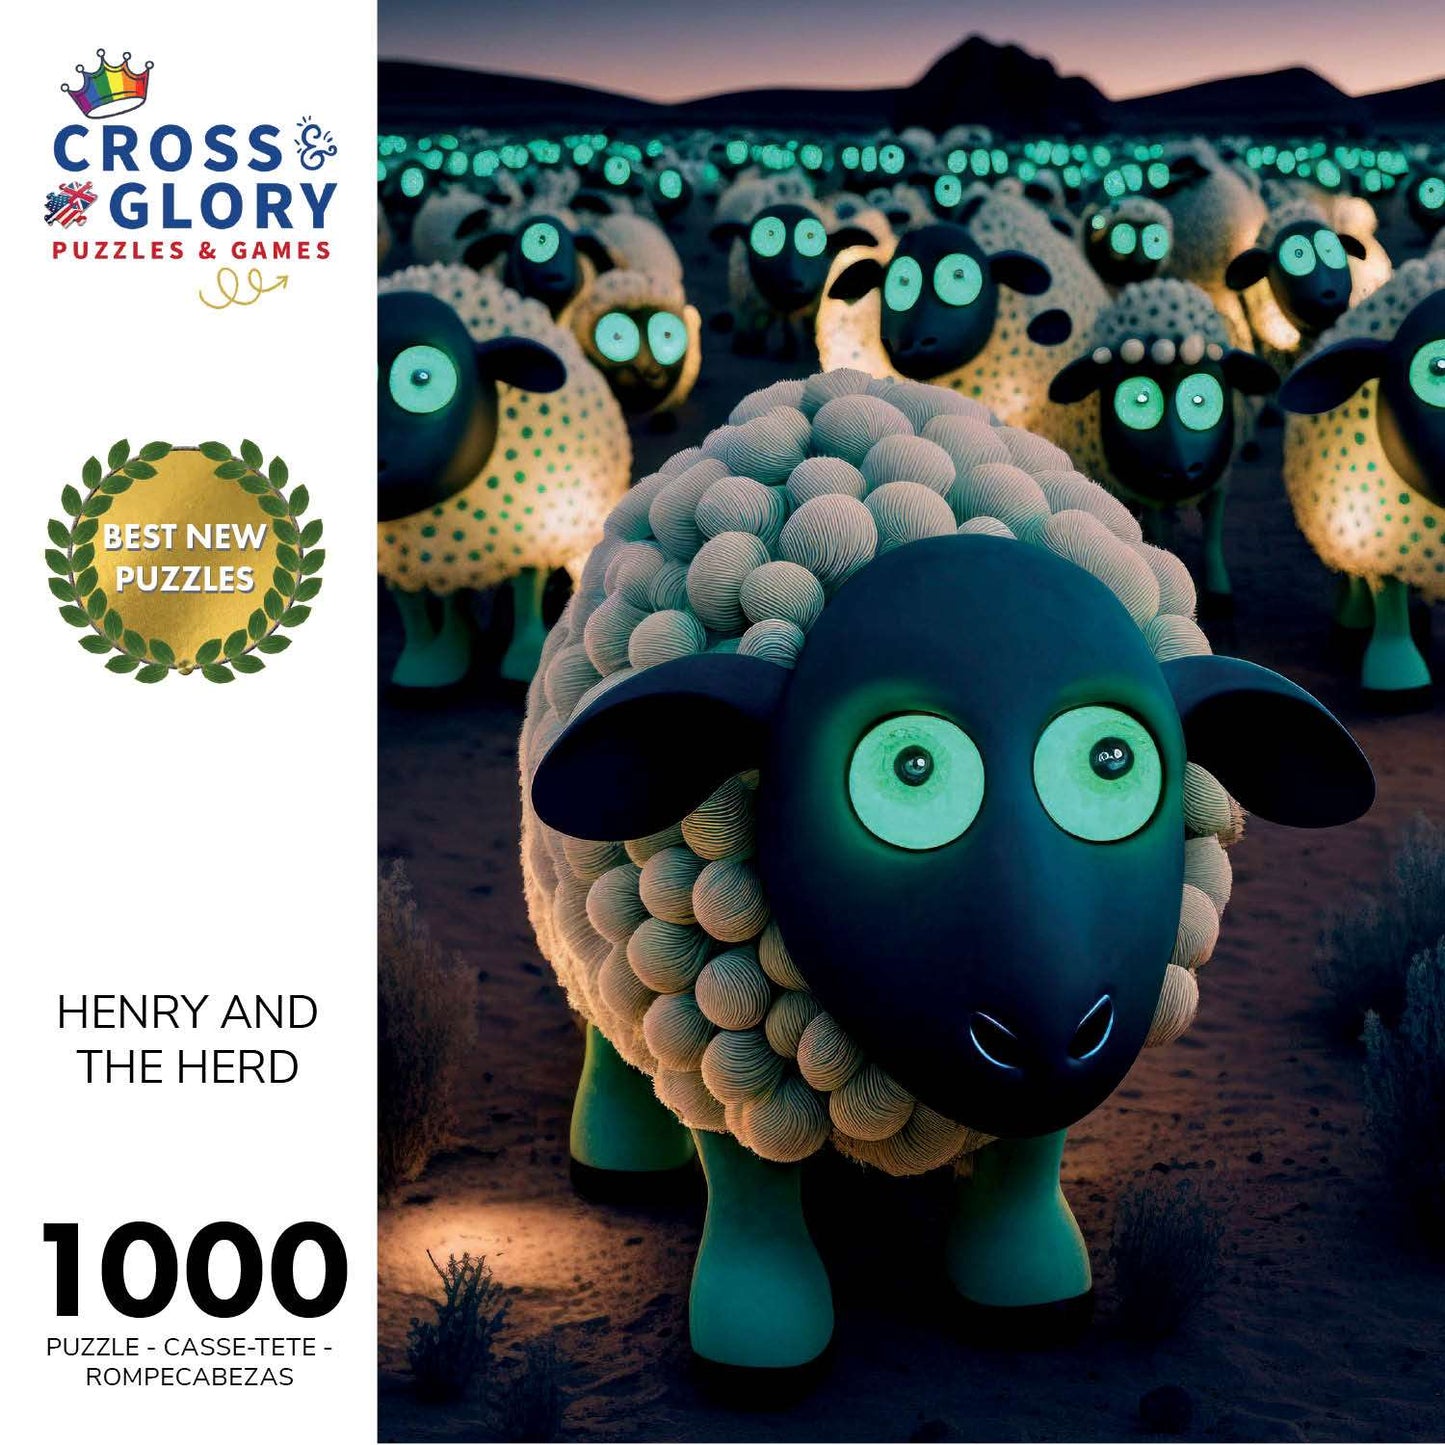 Henry and The Herd - 1000 Piece Jigsaw Puzzle | Cross & Glory